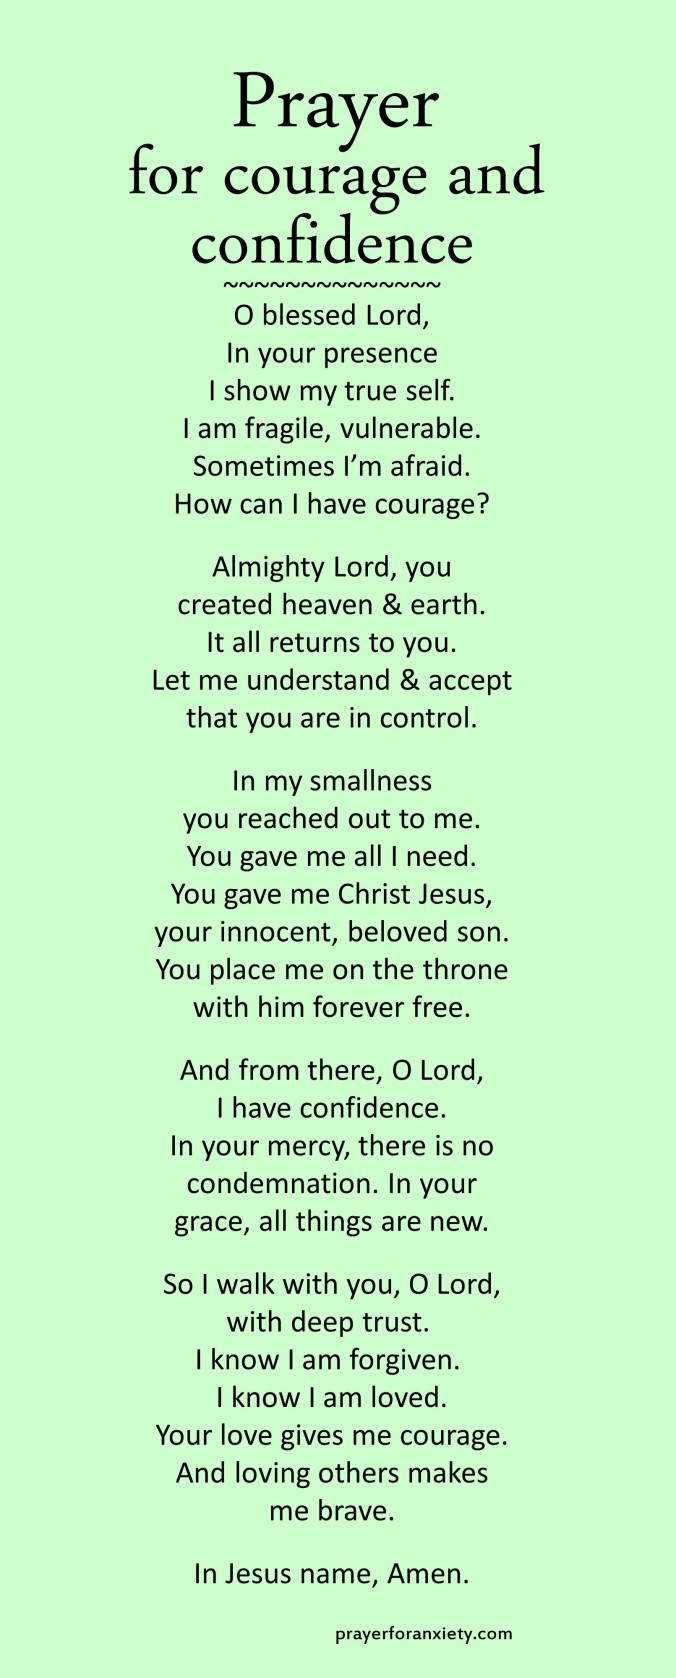 Prayer for courage and confidence